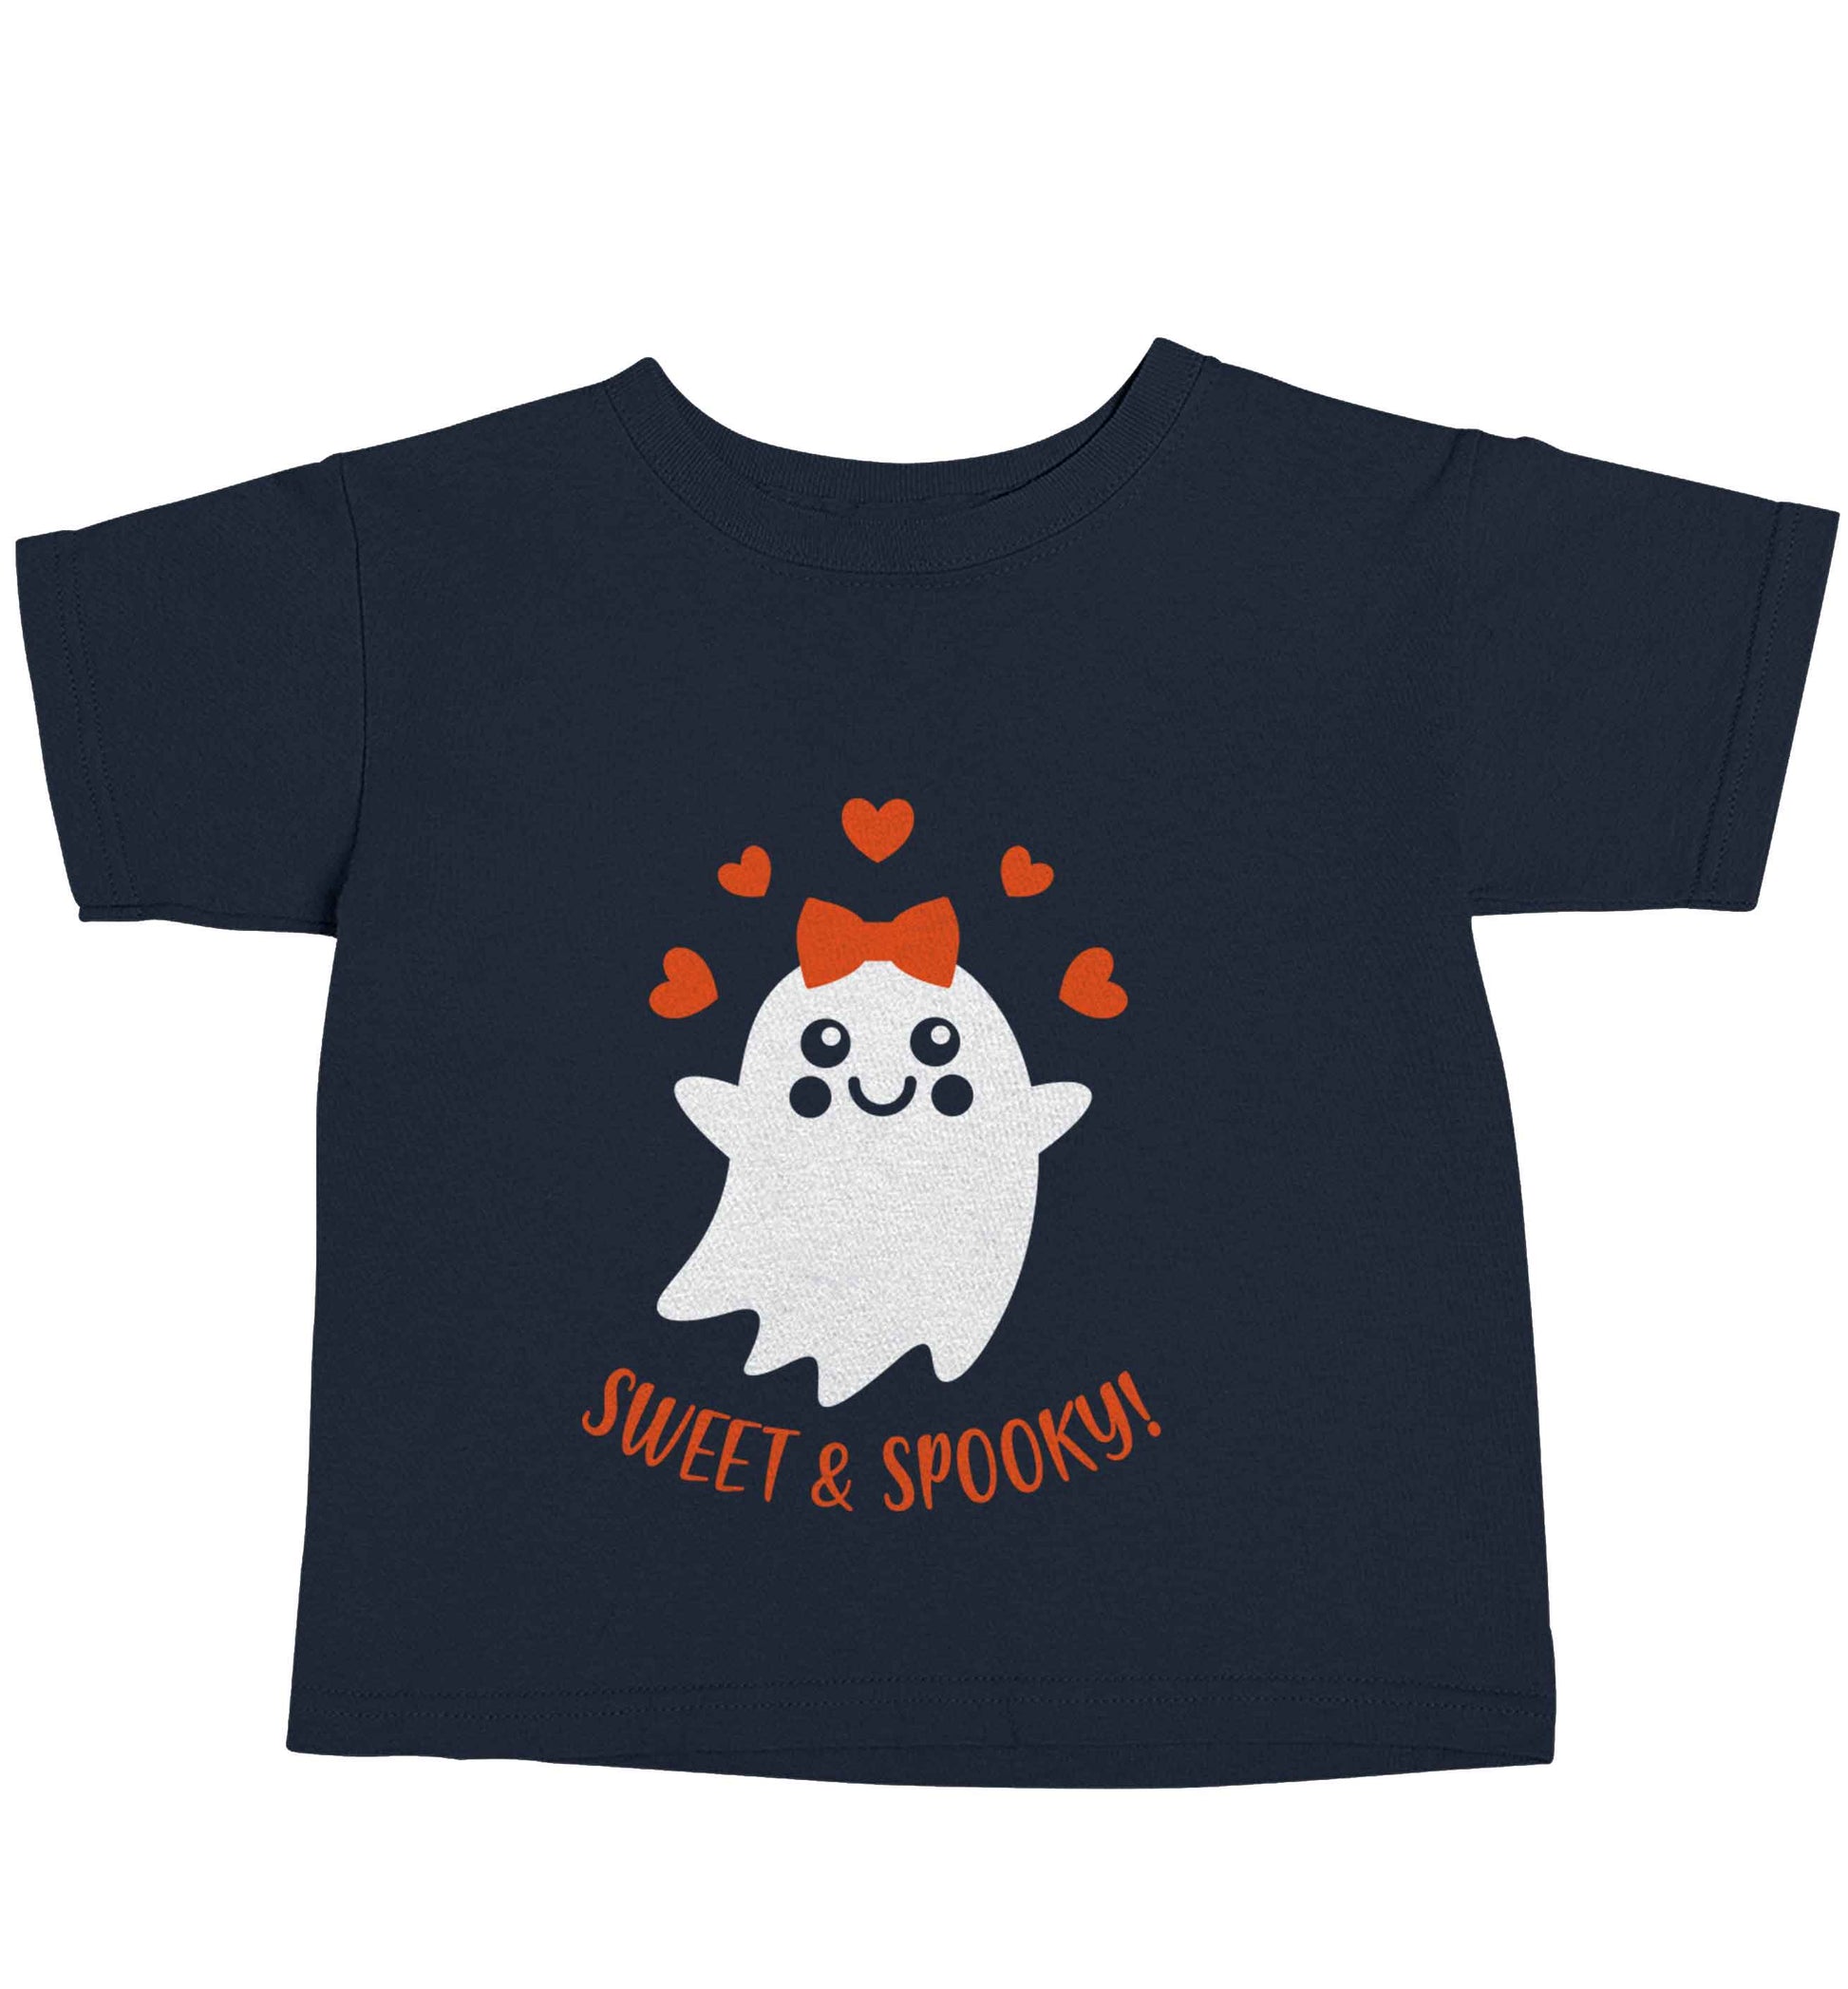 Sweet and spooky navy baby toddler Tshirt 2 Years